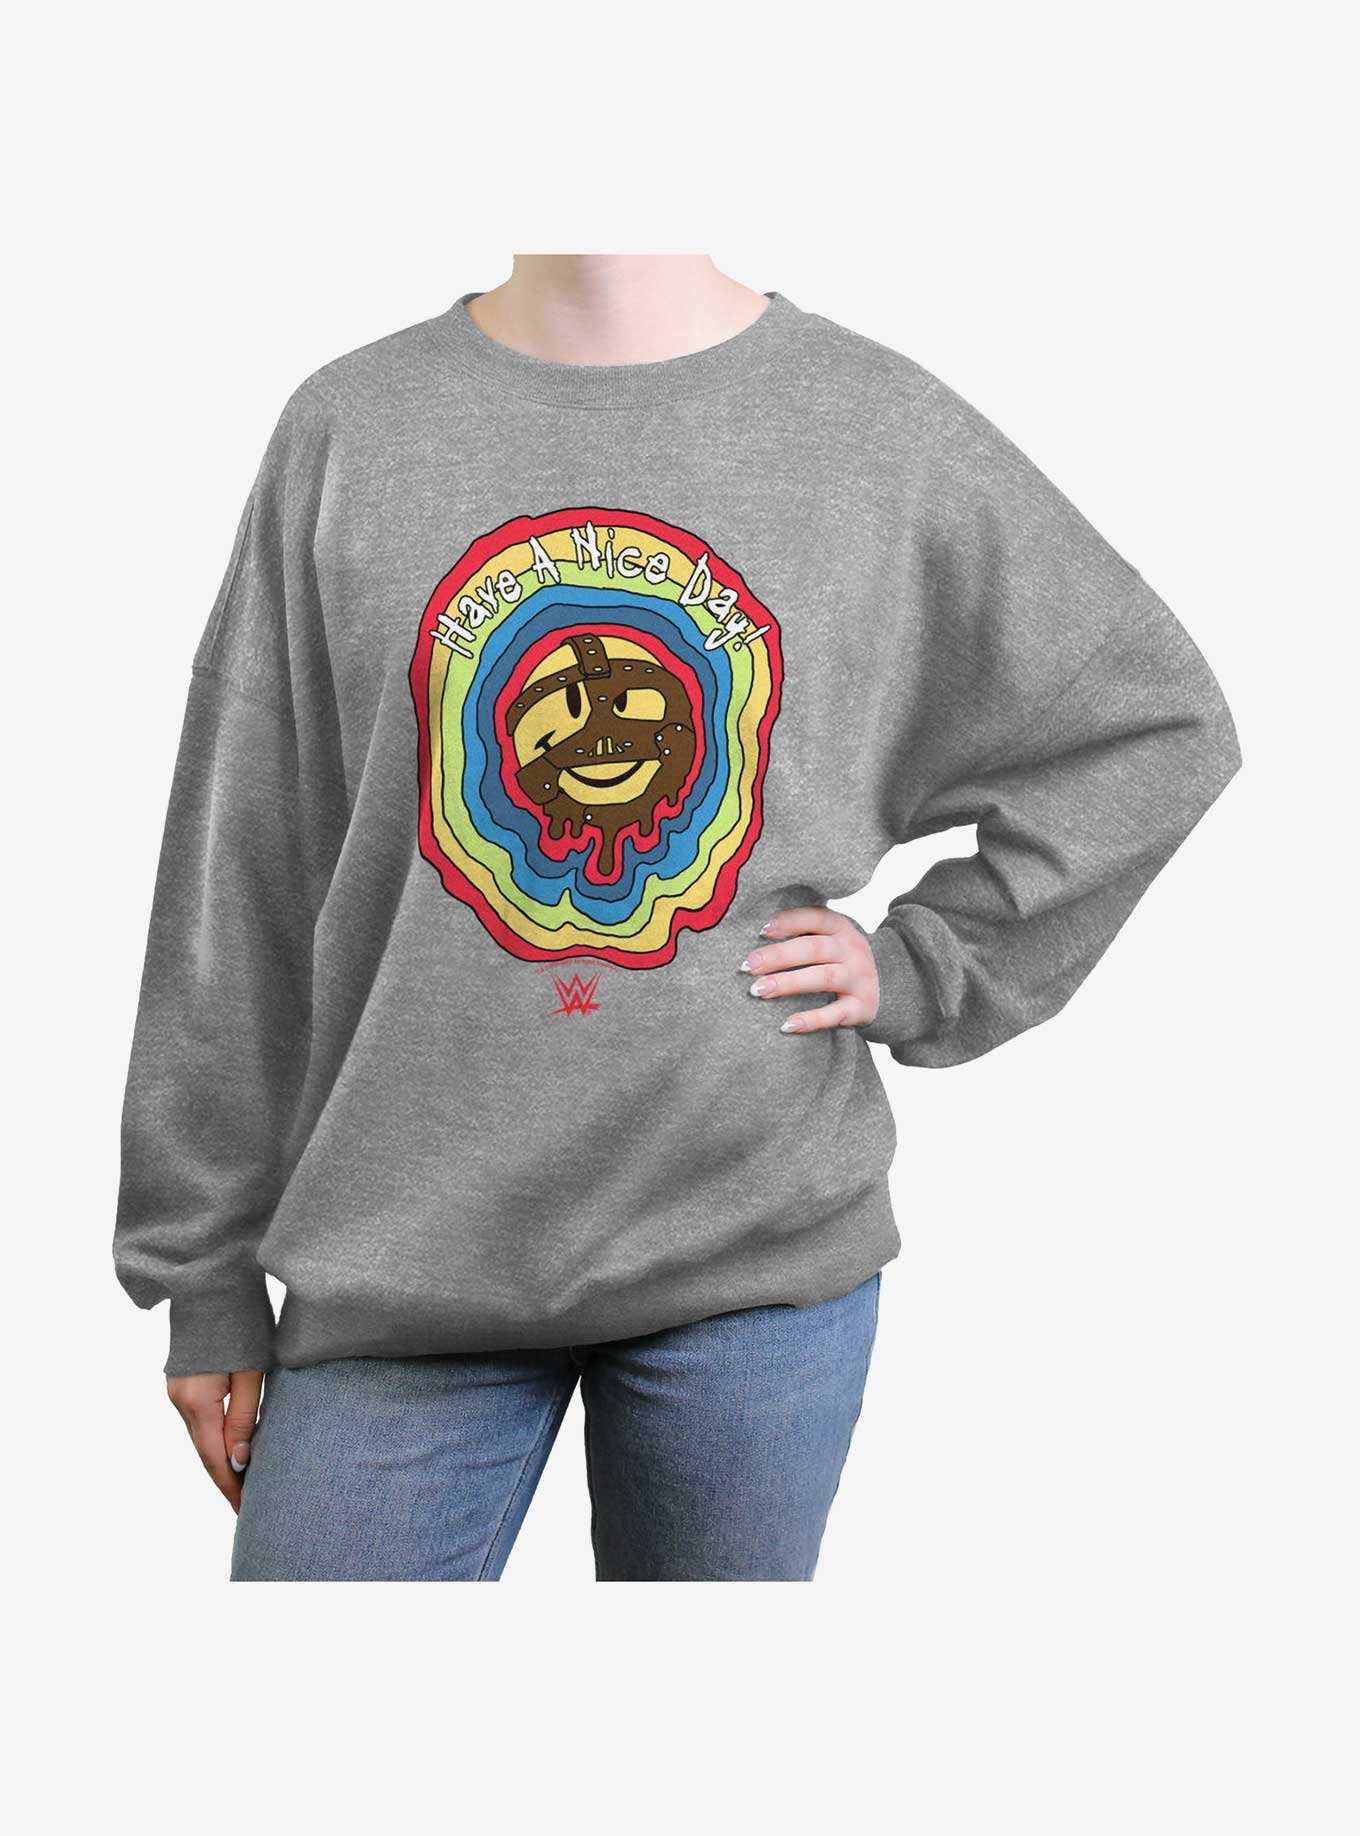 WWE Mick Foley Mankind Have A Nice Day! Girls Oversized Sweatshirt, , hi-res